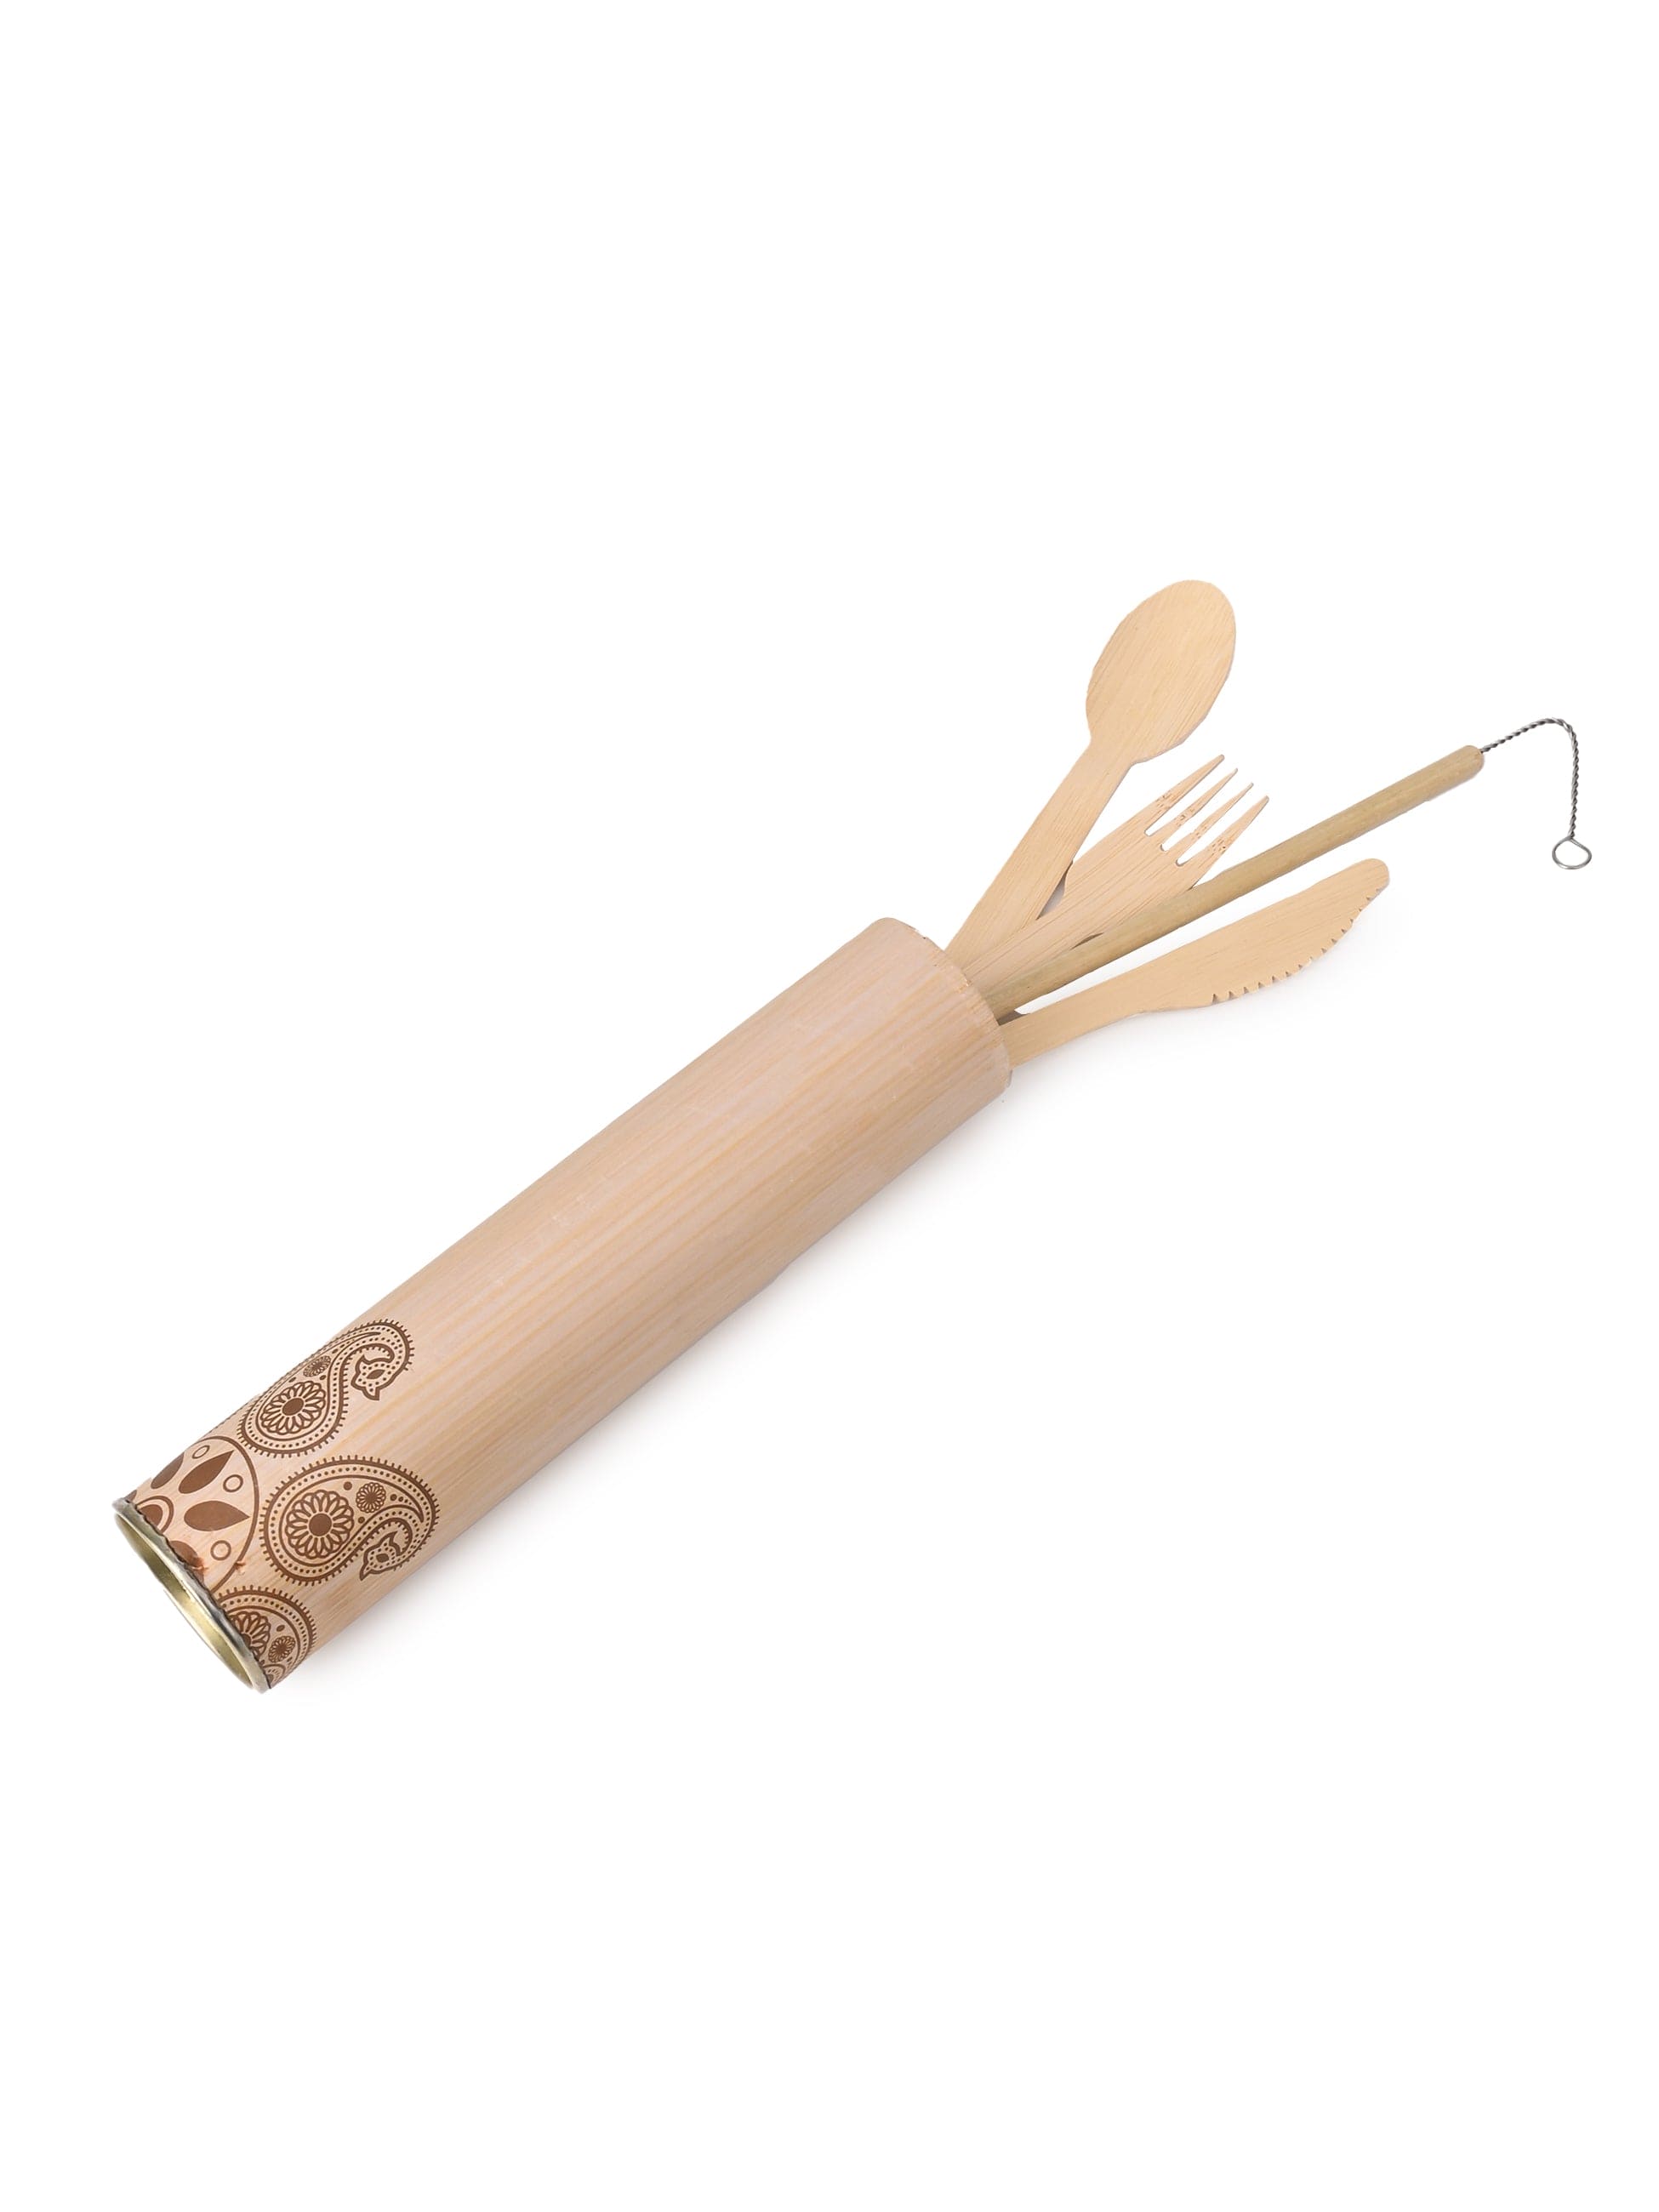 Handcrafted Sustainable Bamboo Cutlery Set in a Paper Box